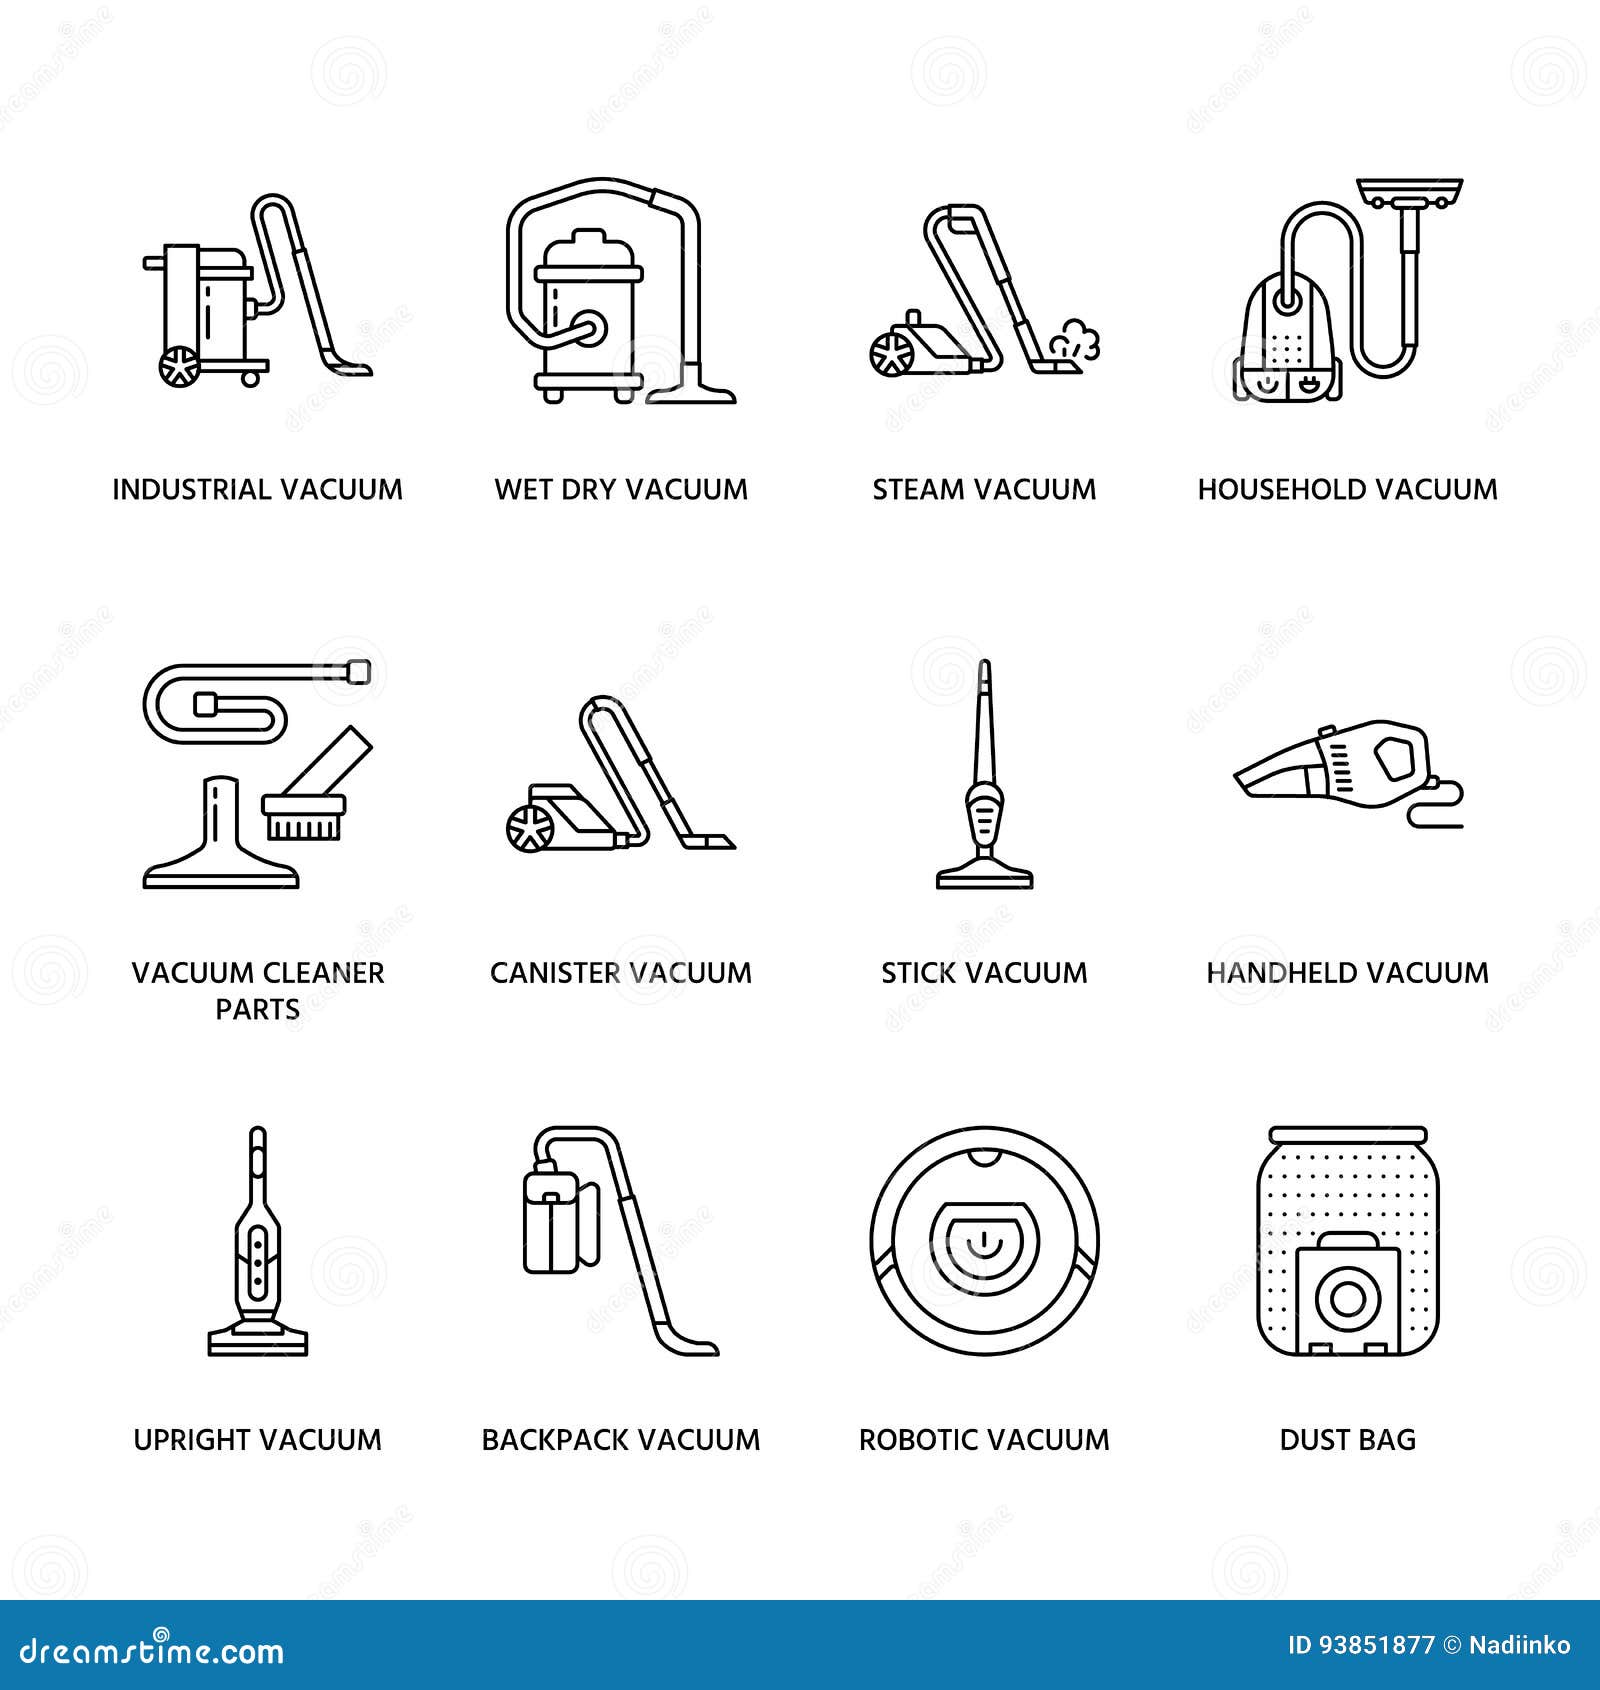 vacuum cleaners colored flat line icons. different vacuums types - industrial, household, handheld, robotic, canister